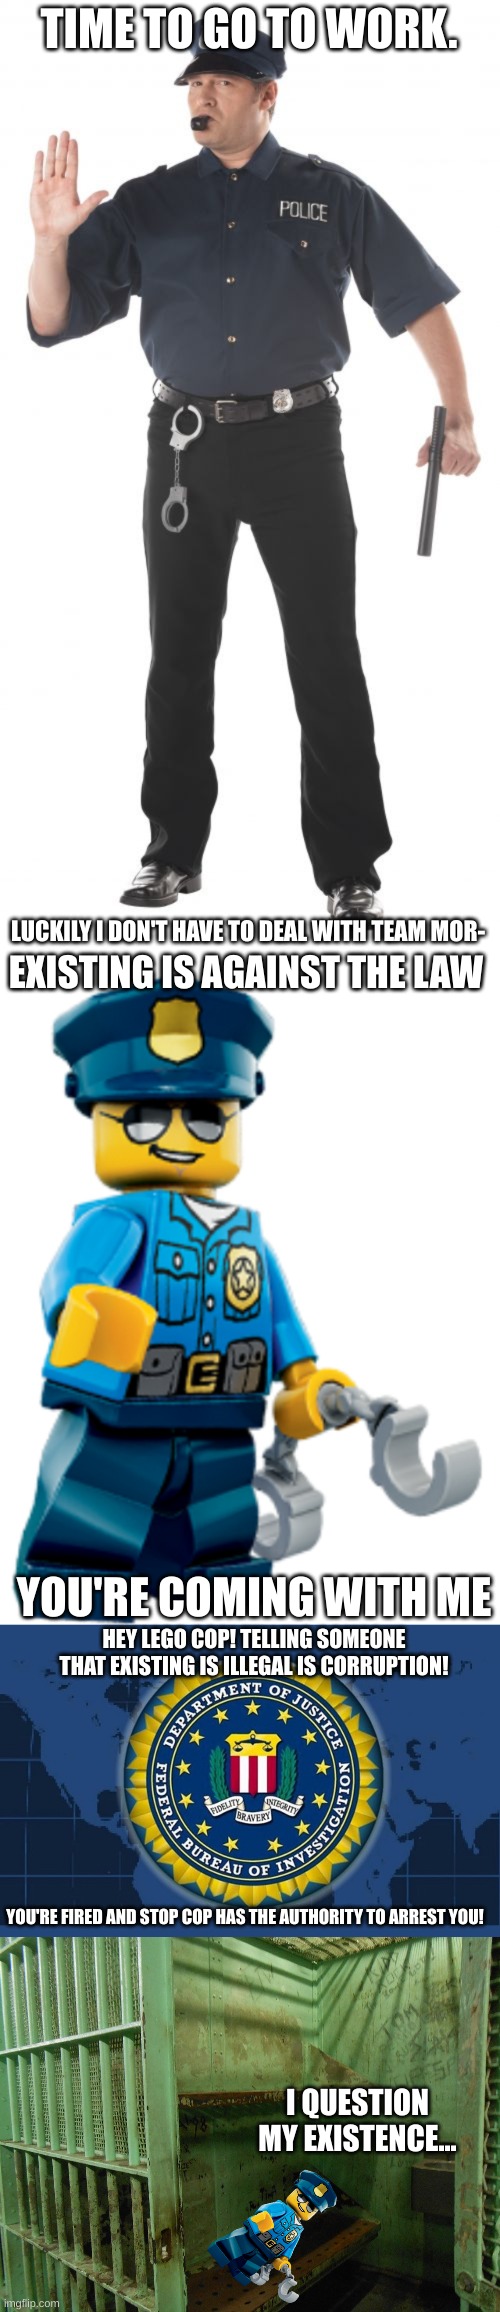 TIME TO GO TO WORK. LUCKILY I DON'T HAVE TO DEAL WITH TEAM MOR-; EXISTING IS AGAINST THE LAW; YOU'RE COMING WITH ME; HEY LEGO COP! TELLING SOMEONE THAT EXISTING IS ILLEGAL IS CORRUPTION! YOU'RE FIRED AND STOP COP HAS THE AUTHORITY TO ARREST YOU! I QUESTION MY EXISTENCE... | image tagged in memes,stop cop,police officer,fbi logo,prison cell | made w/ Imgflip meme maker